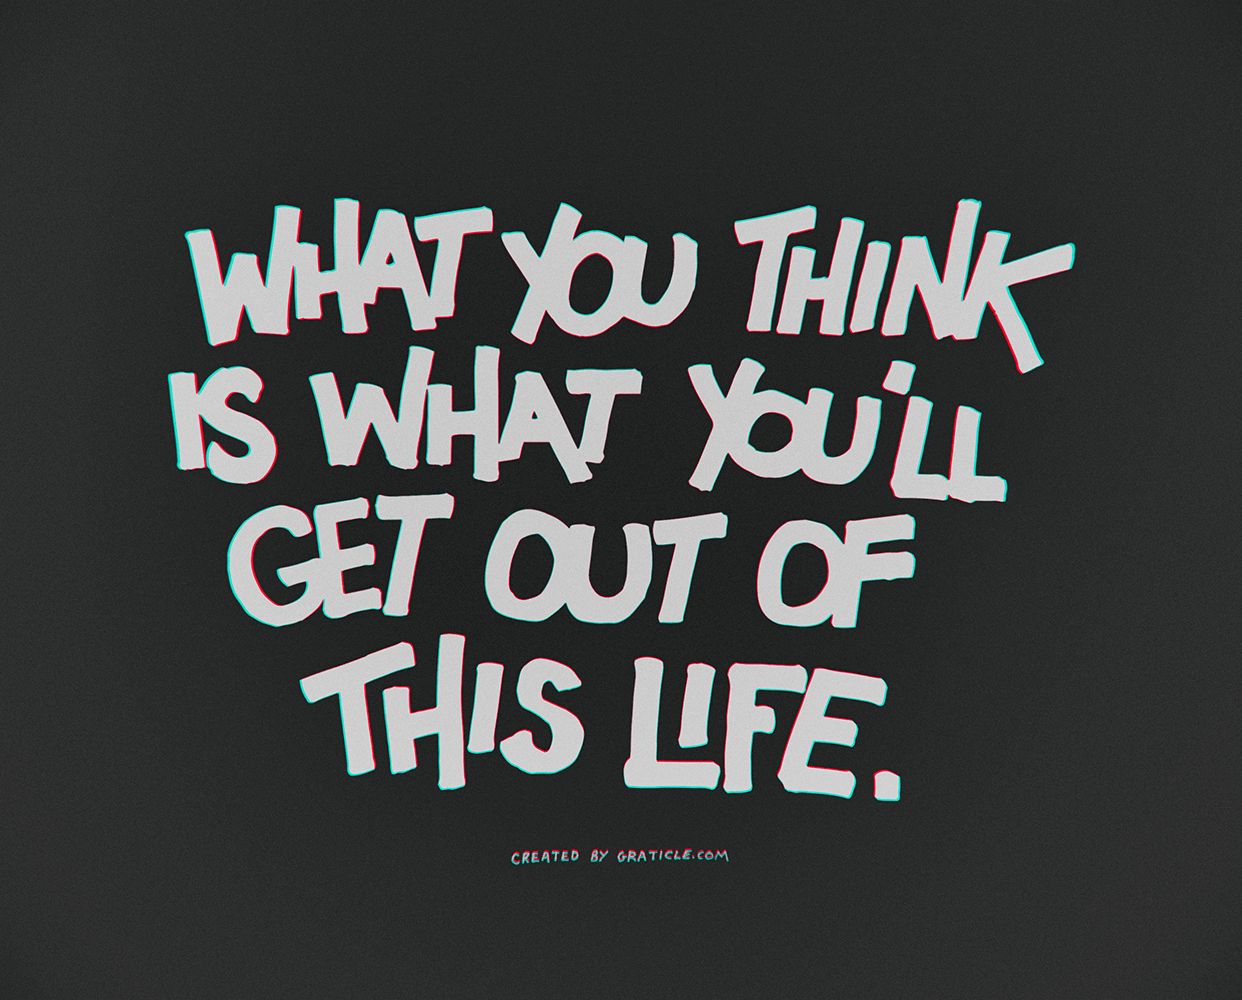 What You Think Is What You’ll Get Out Of This Life